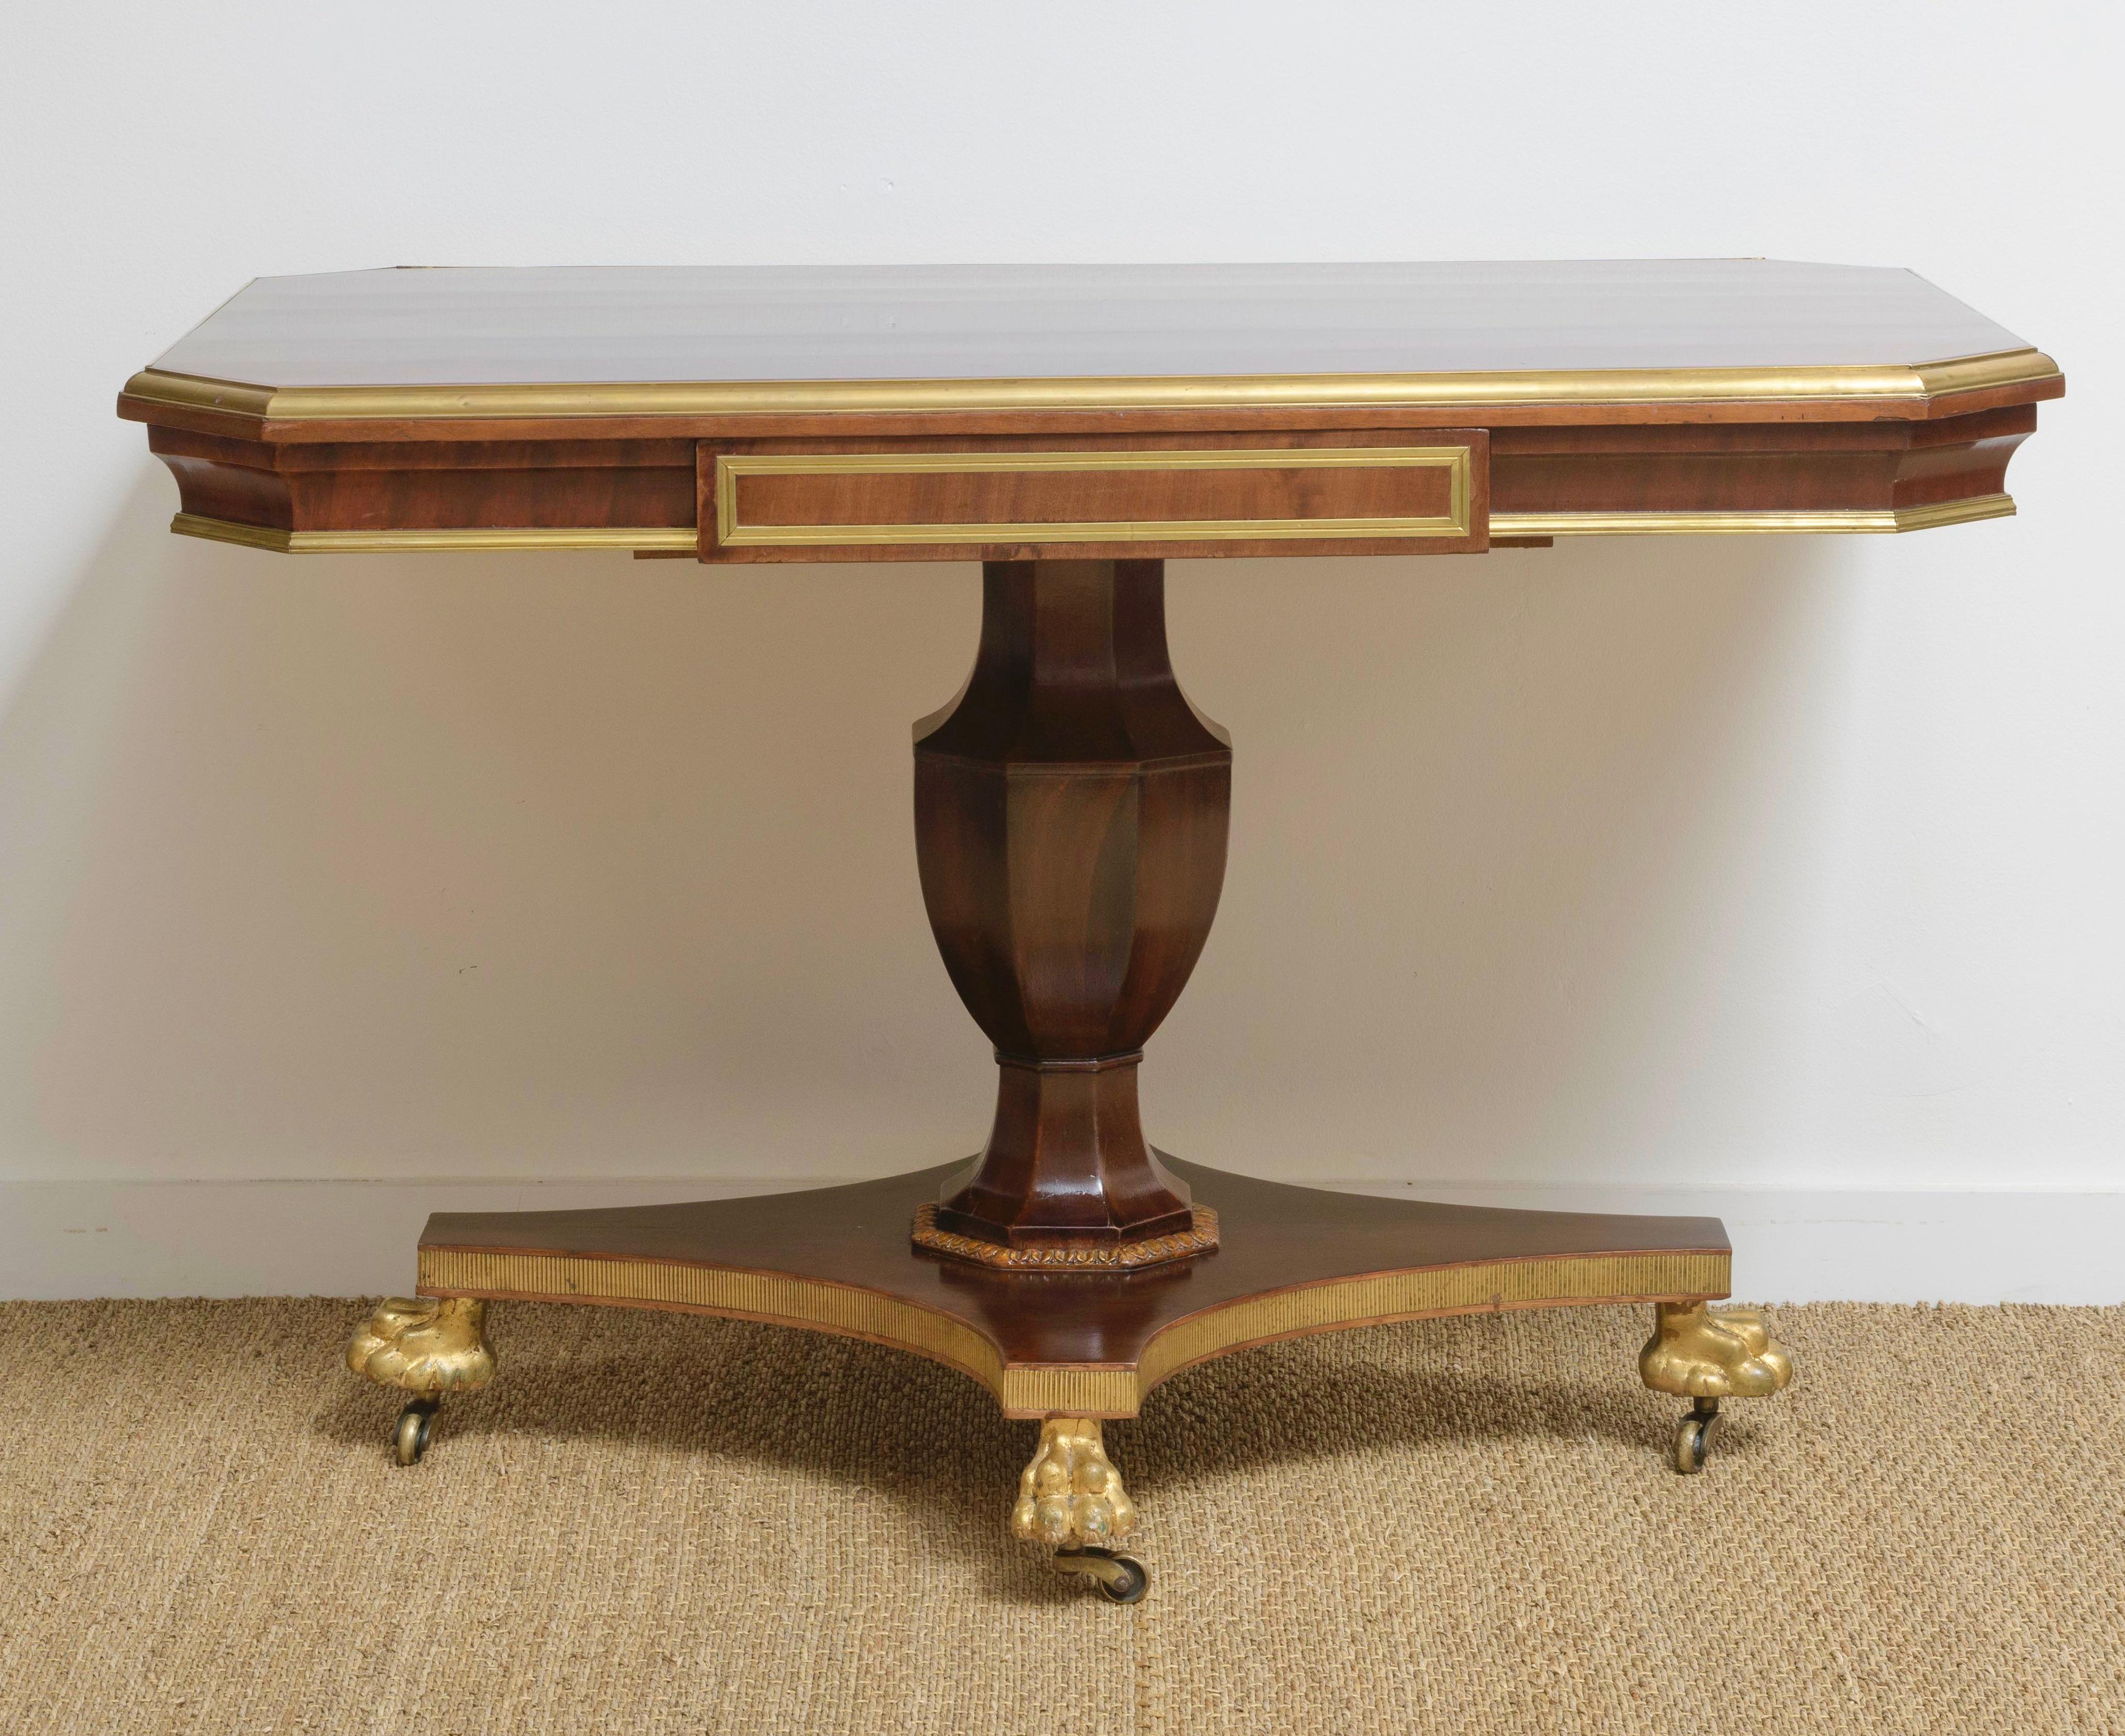 Fine 19th Century Russian Mahogany and Gilt Brass Pedestal Base Library Table.  Beautiful mahogany veneers and brass mounts.  One drawer.  Urn pedestal  resting on base with hairy paw gilded feet on wheels.   Highly decorative. 